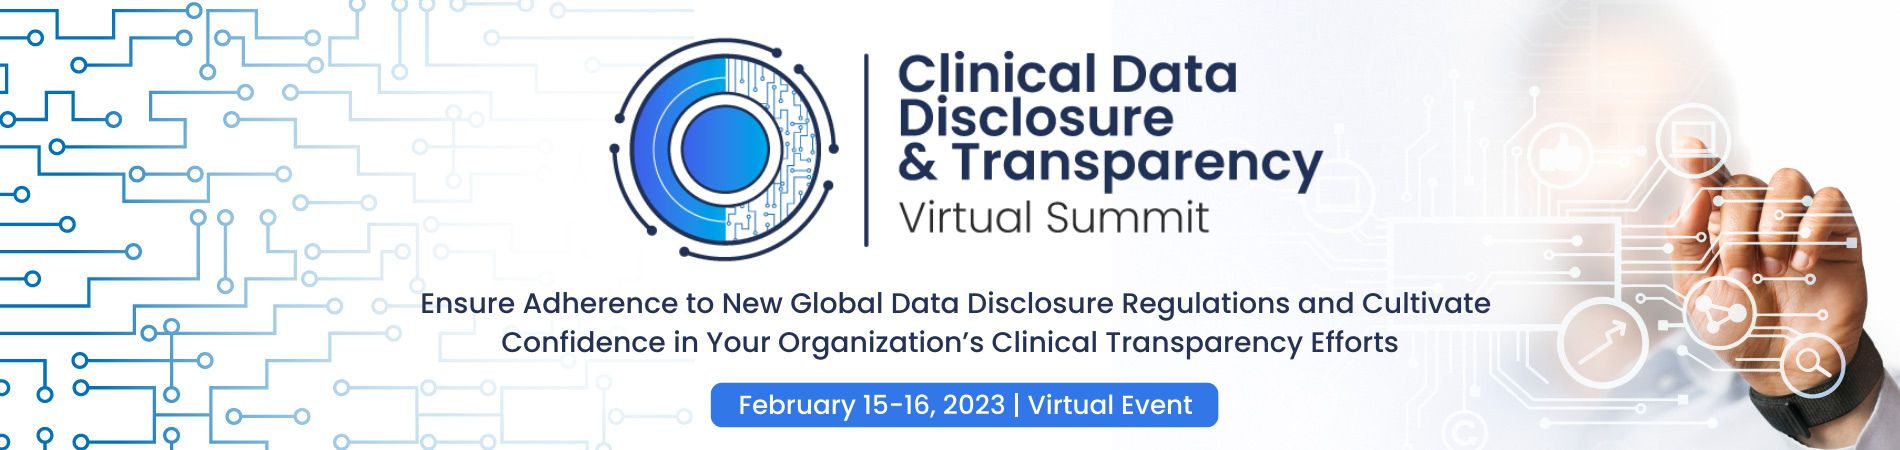 Clinical Data Disclosure and Transparency Summit, Online Event